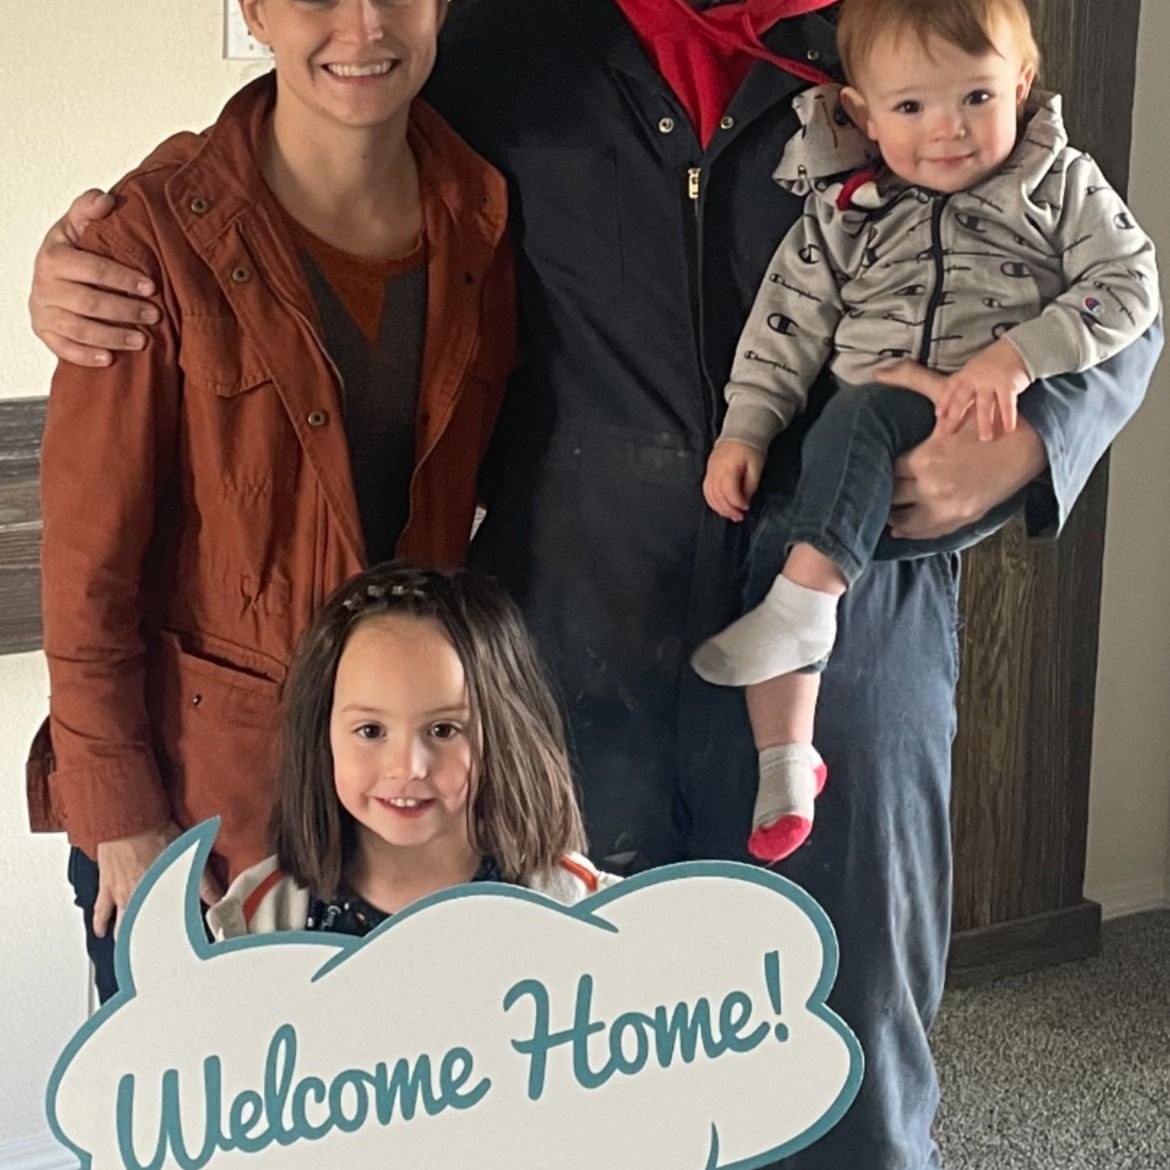 KEVYN A. welcome home image